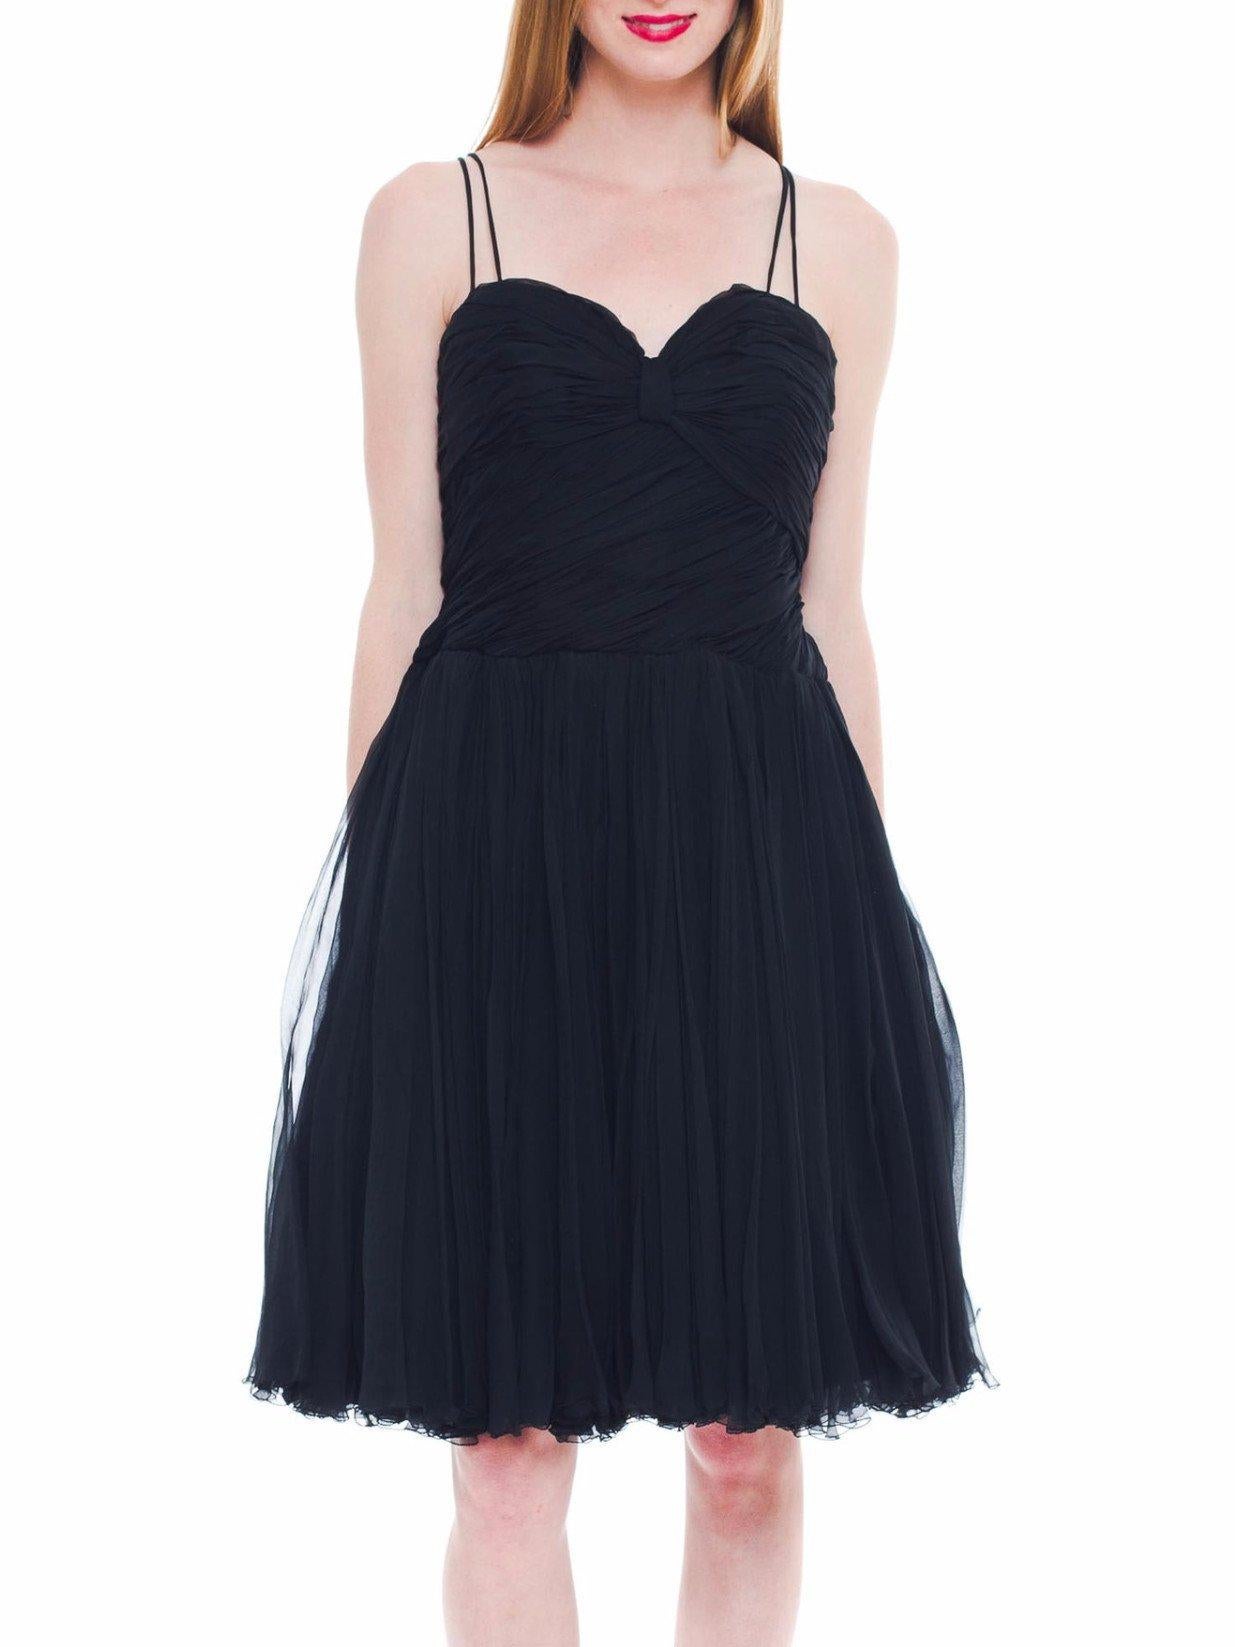 1950S BOB BUGNAND Black Silk Chiffon Draped Bodice & Swing Skirt Cocktail Dress In Excellent Condition For Sale In New York, NY